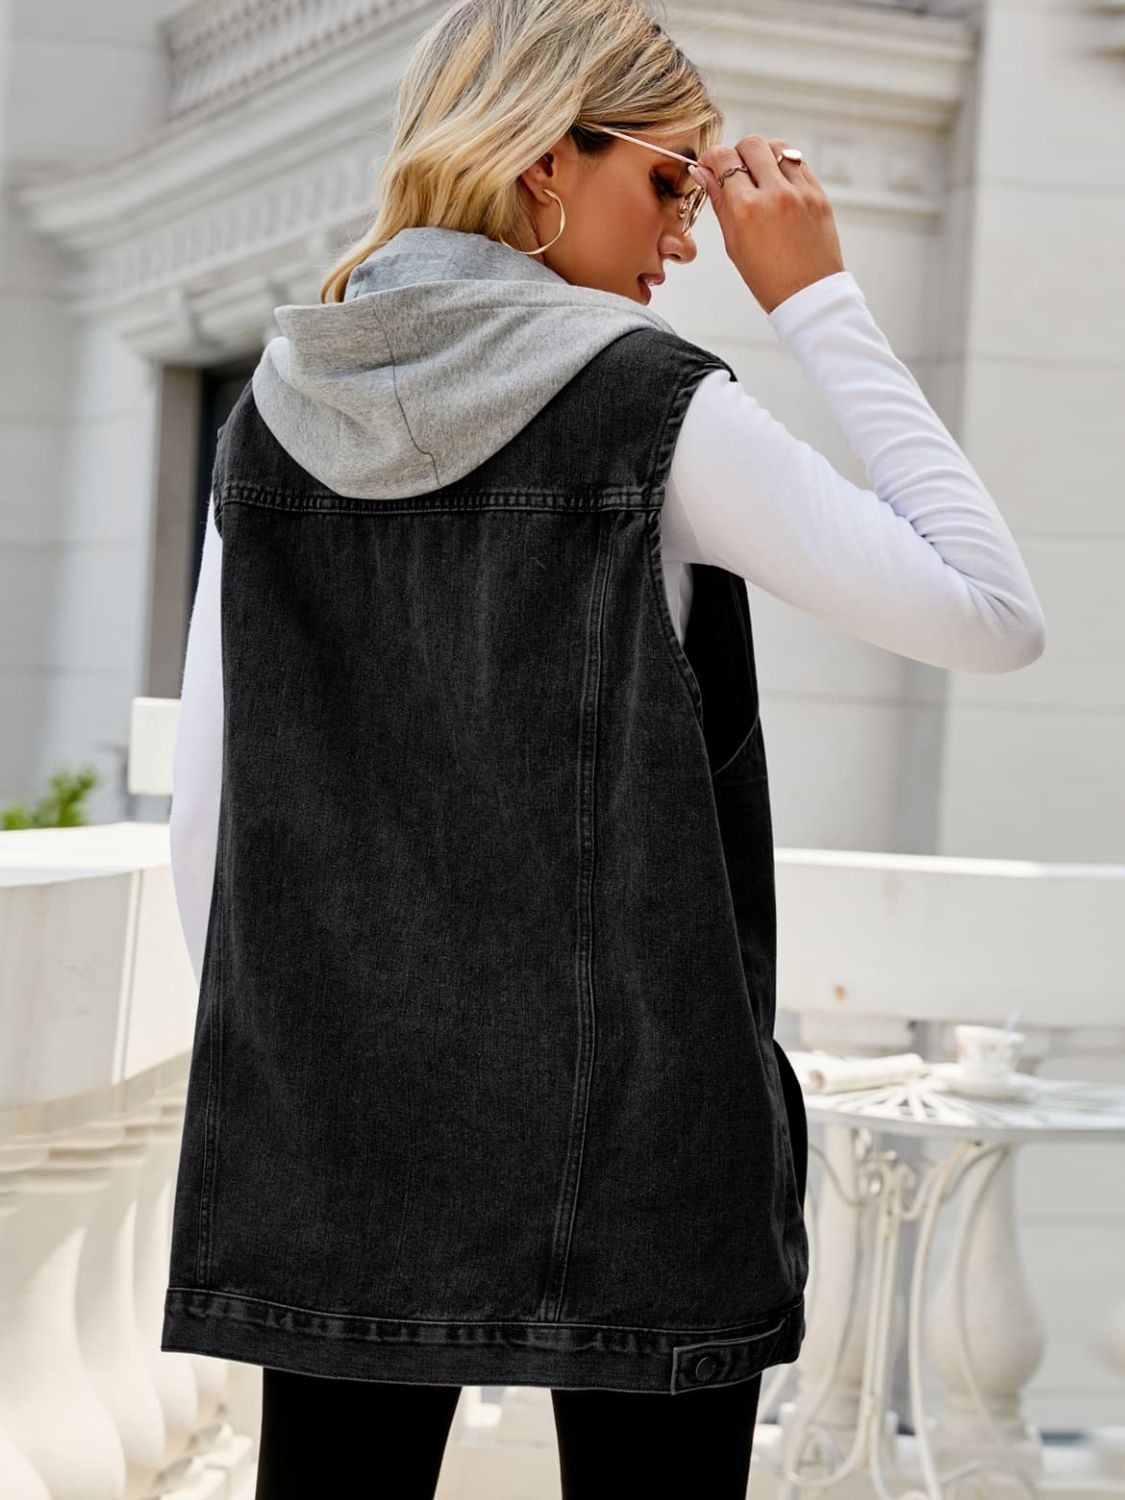 Drawstring Hooded Sleeveless Denim Top with Pockets Print on any thing USA/STOD clothes